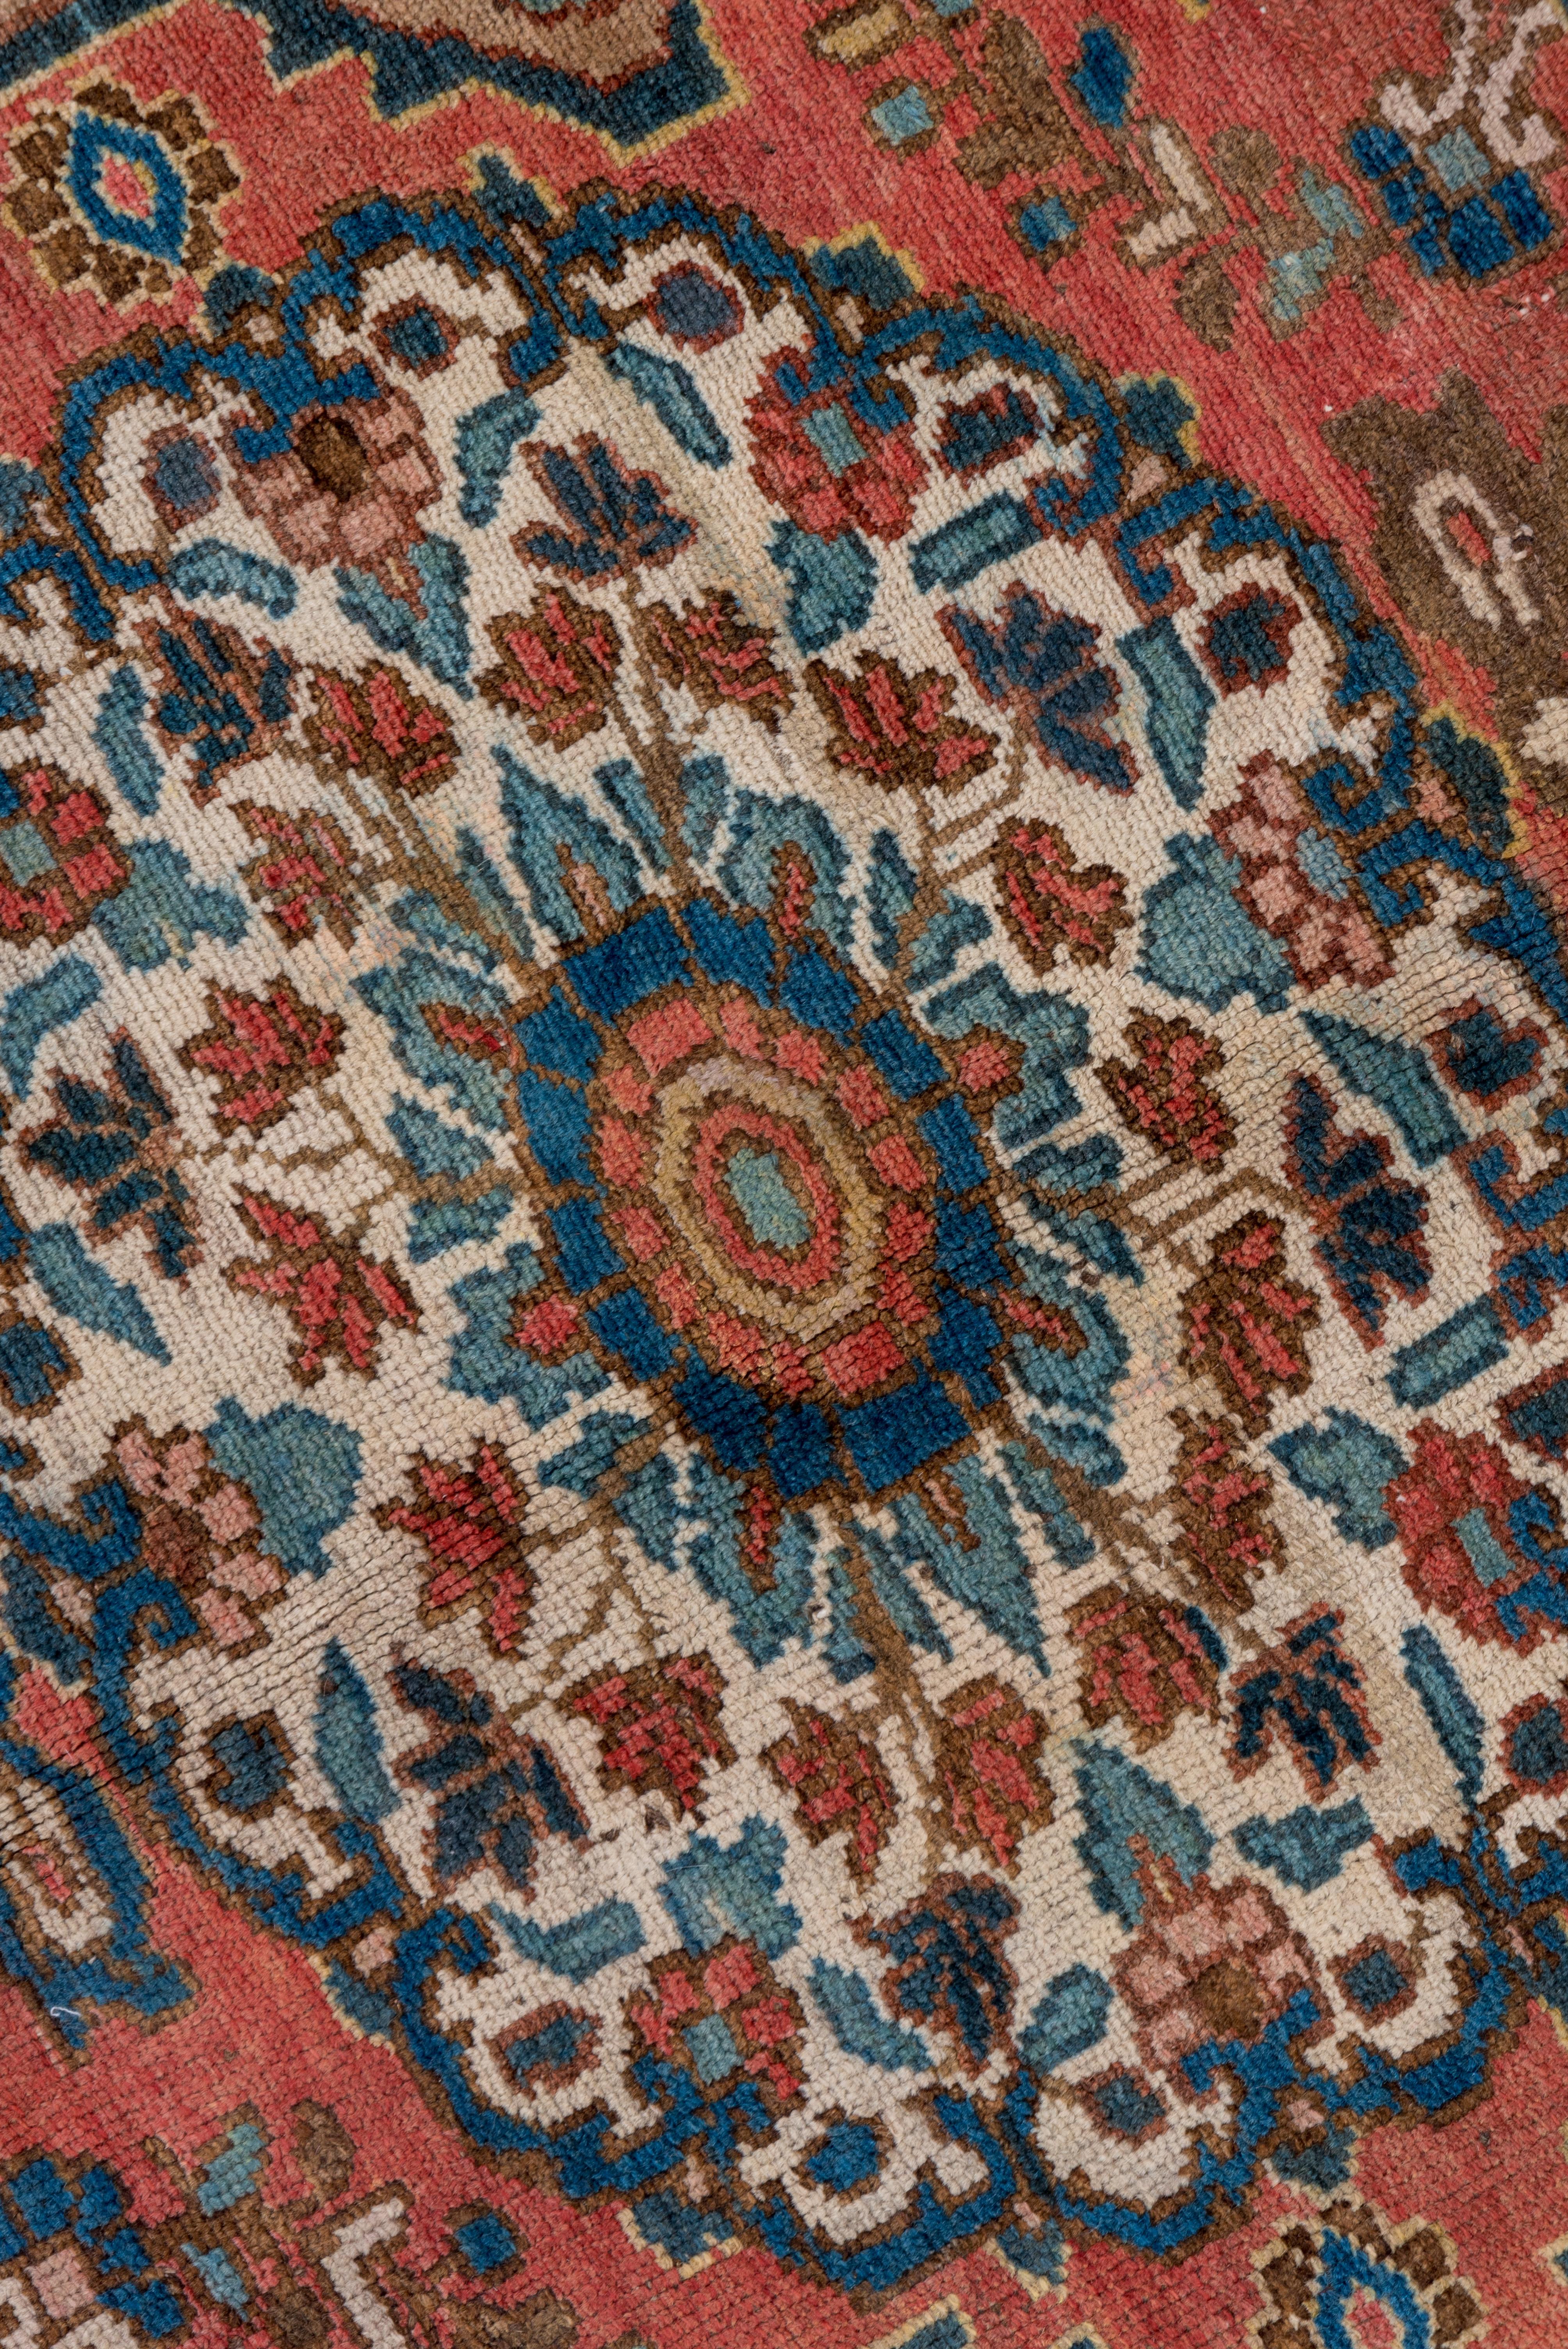 Antique Rustic Persian Bakhtiary Gallery Carpet, Rose and Blue Field For Sale 1